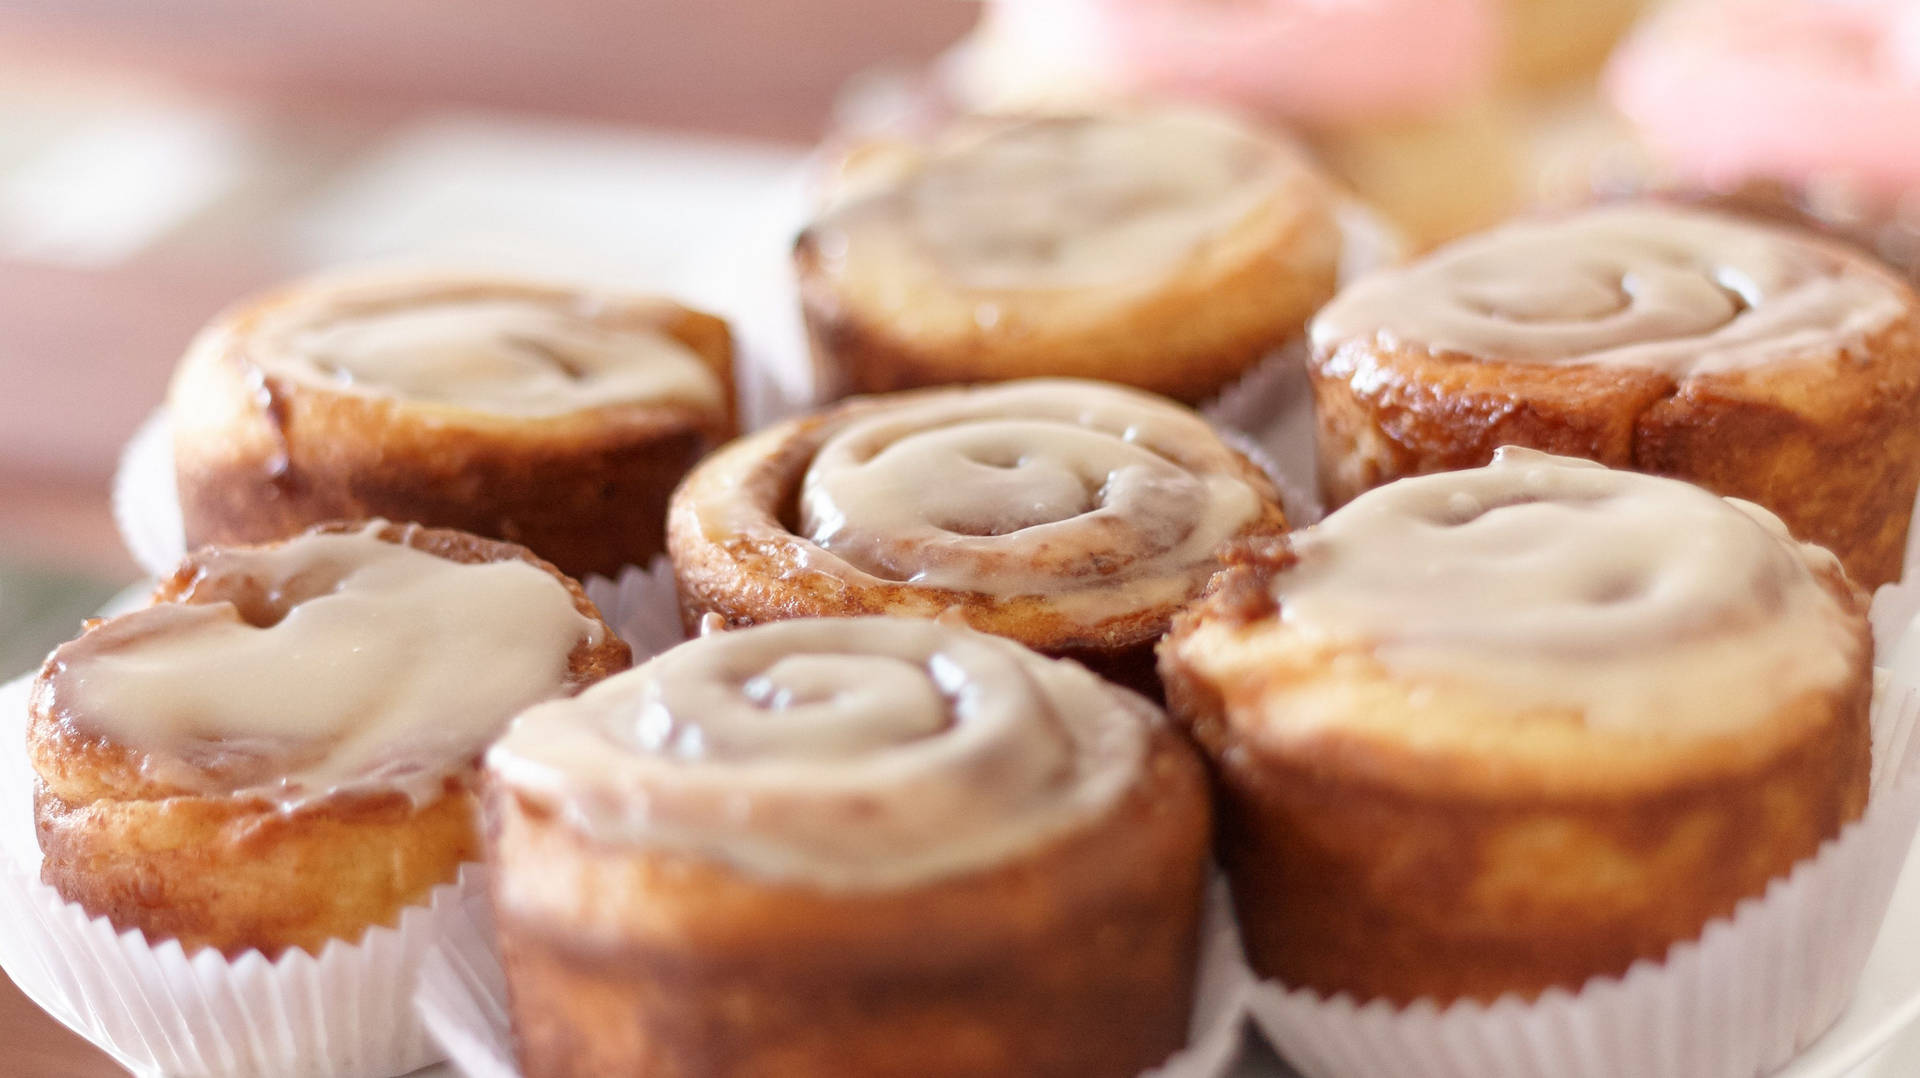 Cinnamon Buns In Muffin Liners Wallpaper